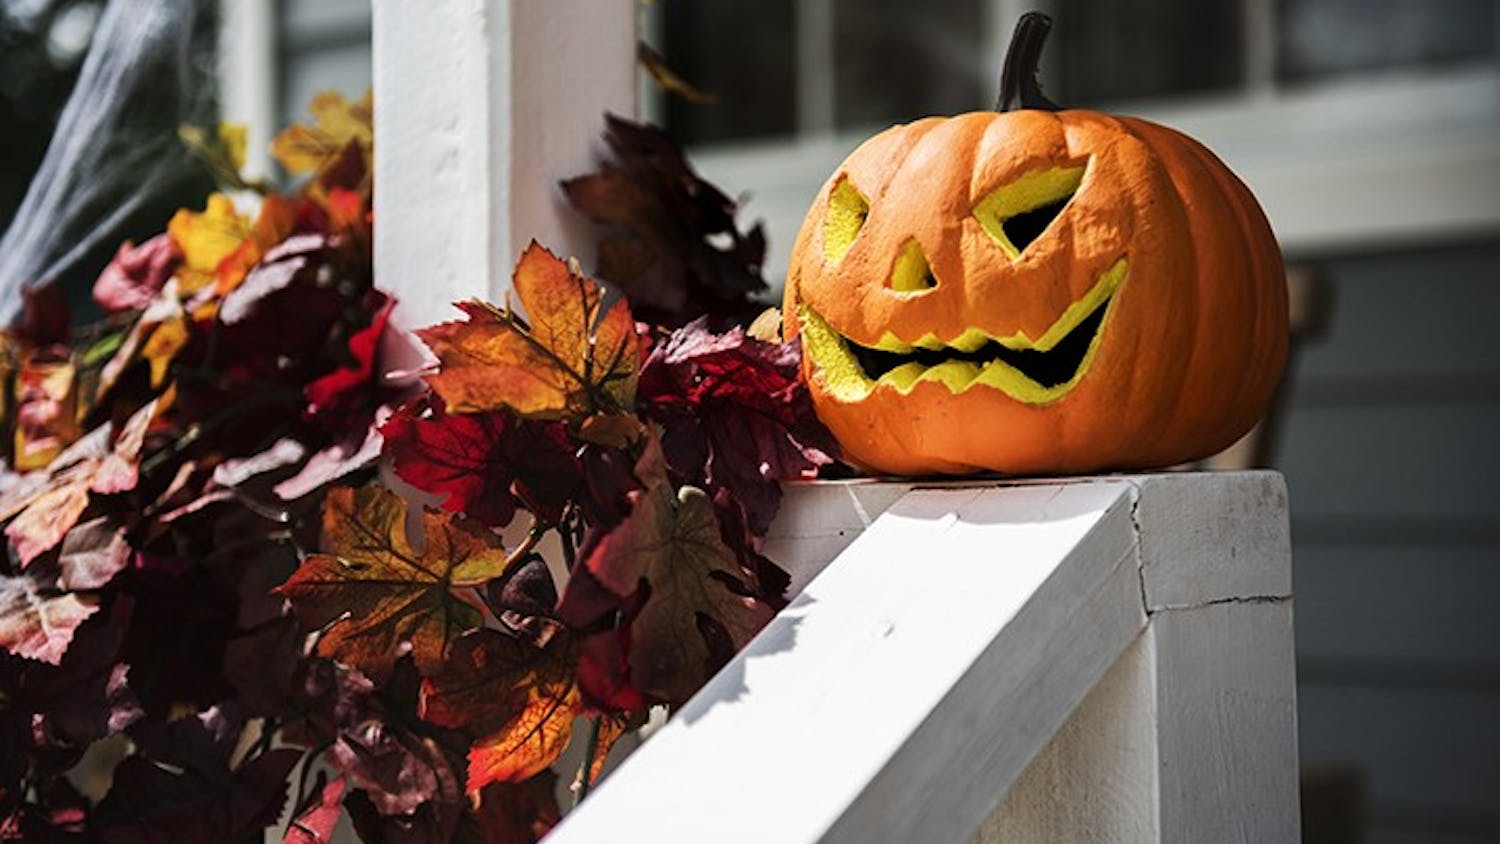 A jack-o'-lantern sits on top of a railing. Carving pumpkins into jack-o'-lanterns is often a popular fall activity.